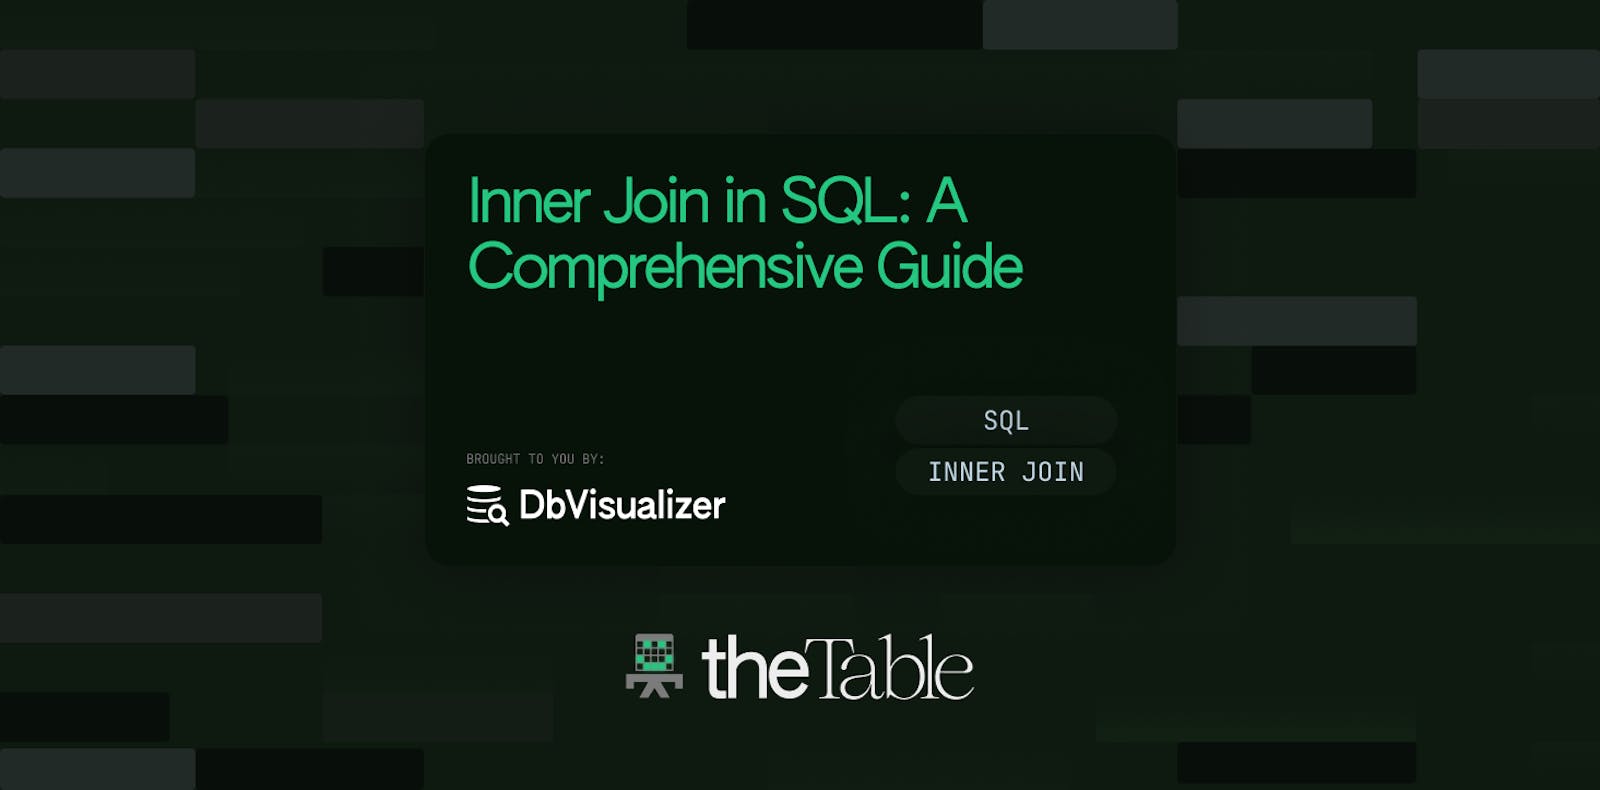 Inner Join in SQL: A Comprehensive Guide